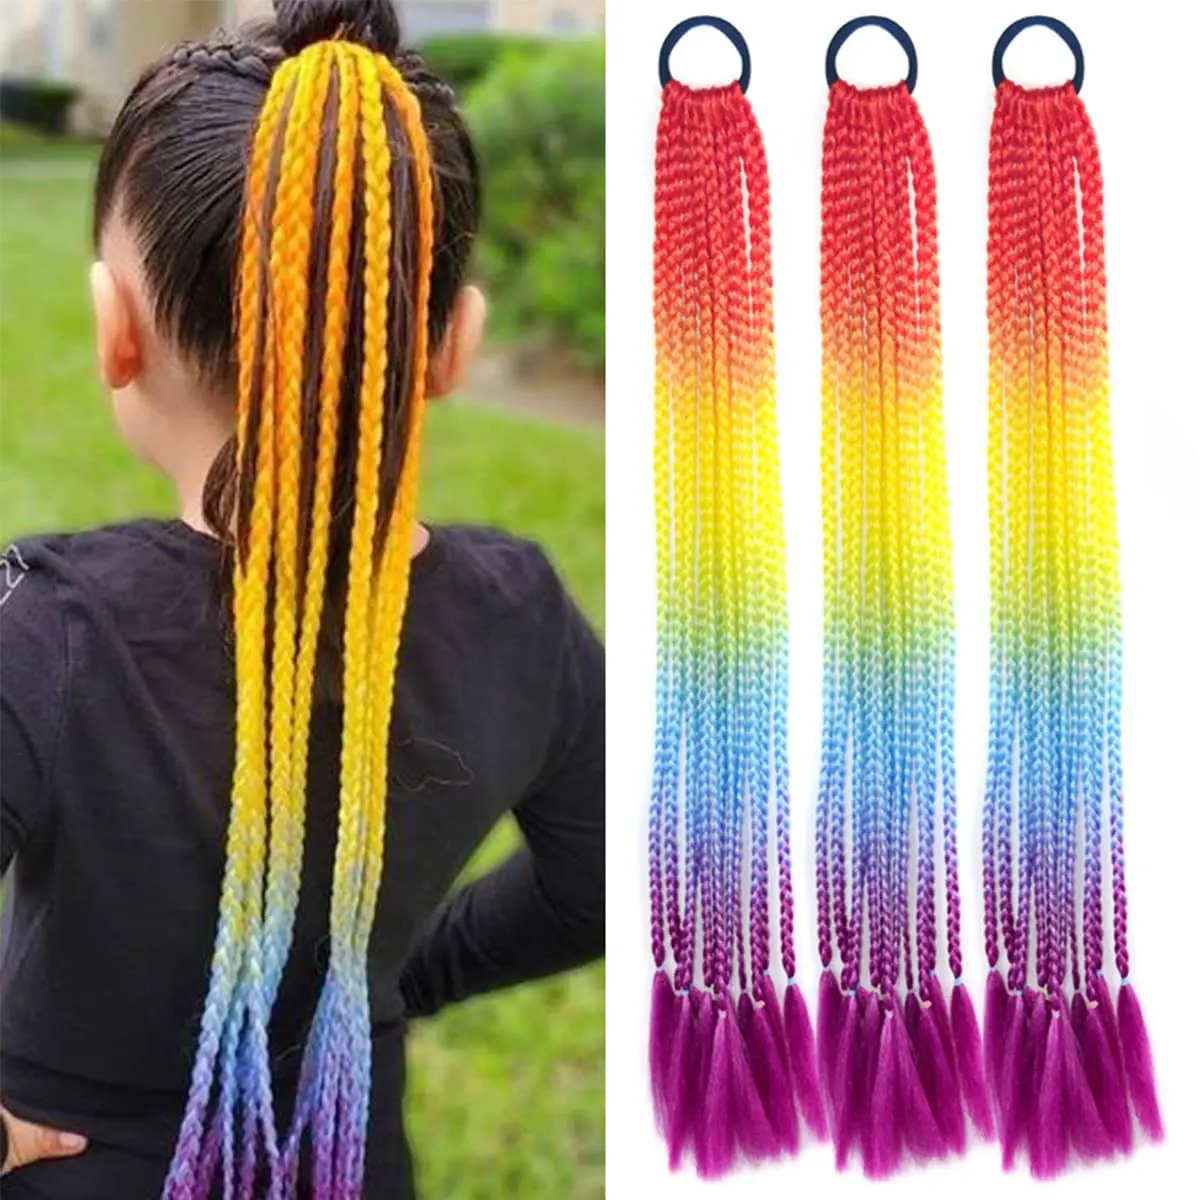 

24inch Girls Colored Box Braided Ponytail With Elastic Rubber Band Hair Extensions Rainbow Color Kids Box Wig Pigtail Hairpiece